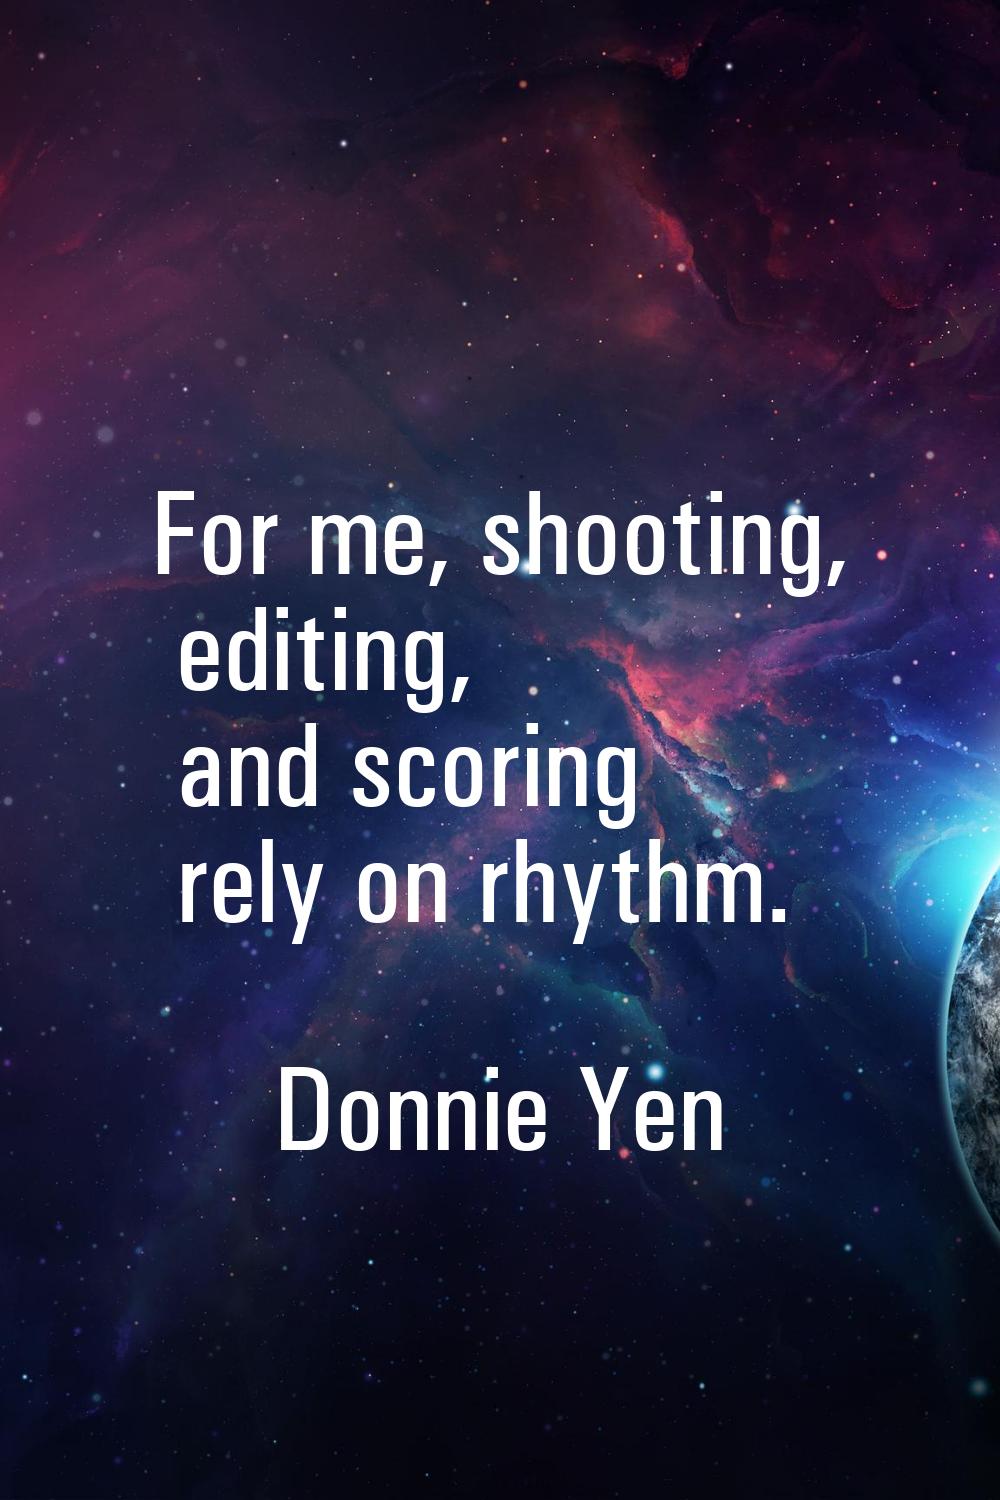 For me, shooting, editing, and scoring rely on rhythm.